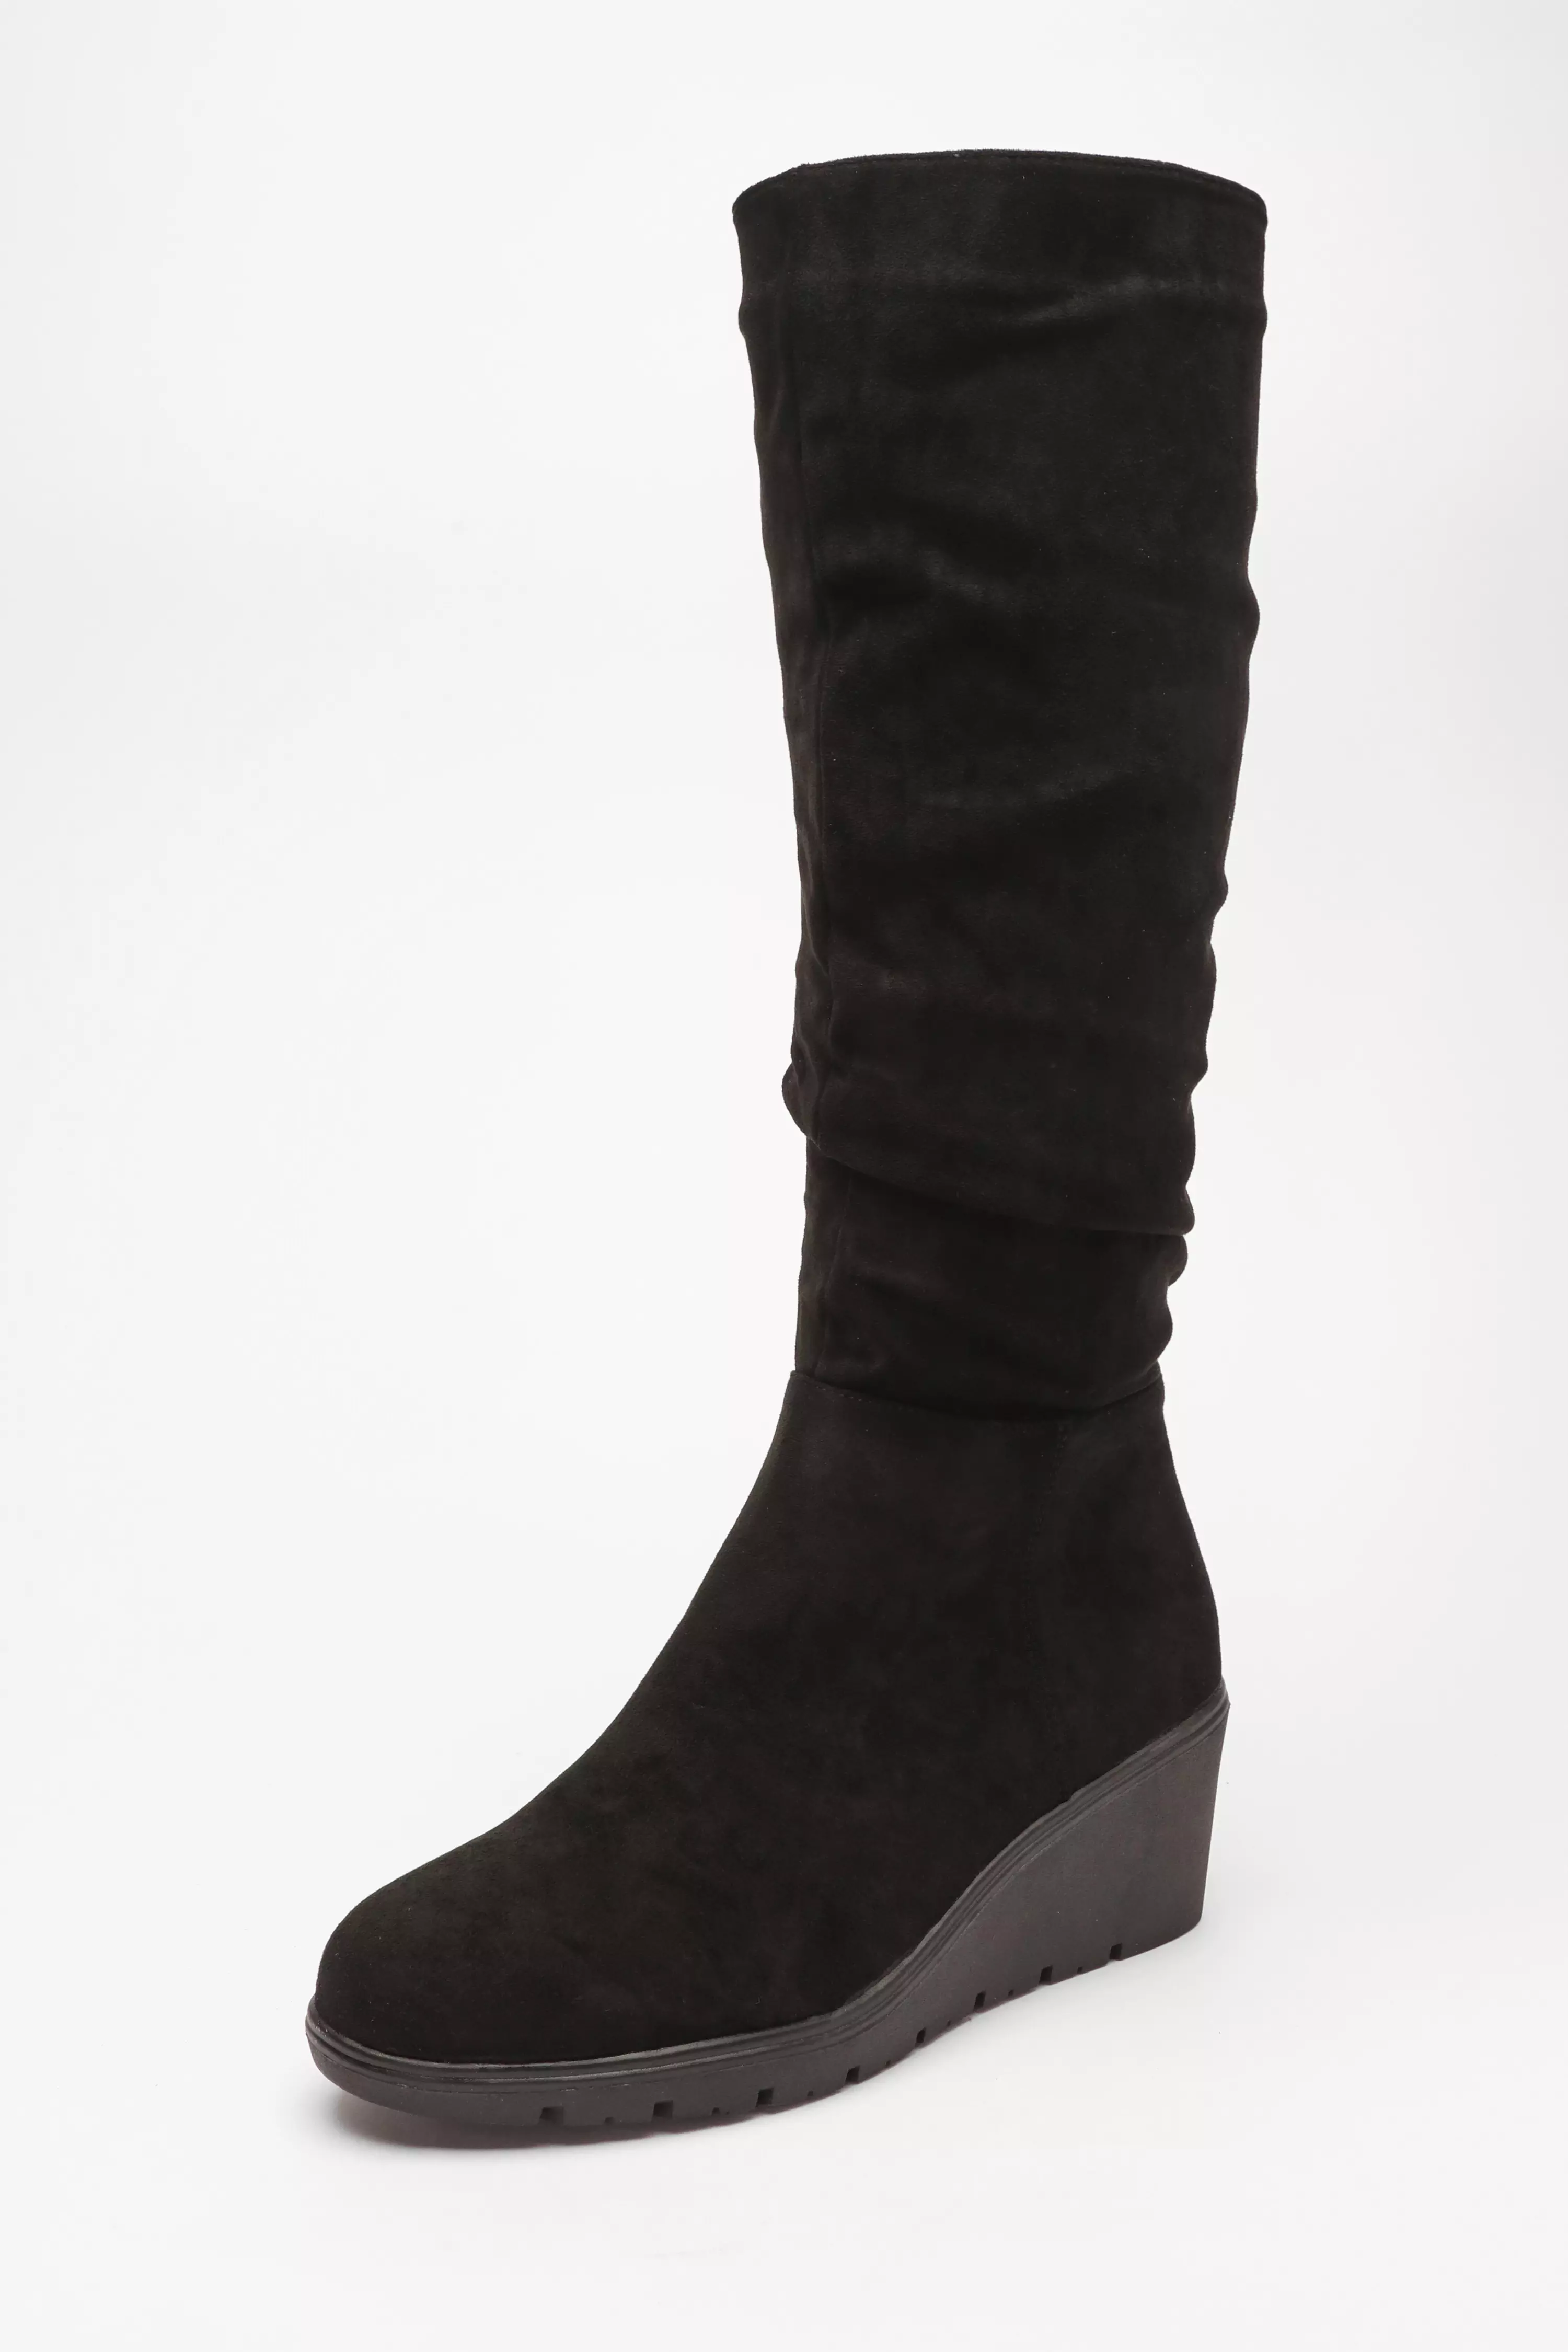 Black Faux Suede Low Wedge Knee High Boots